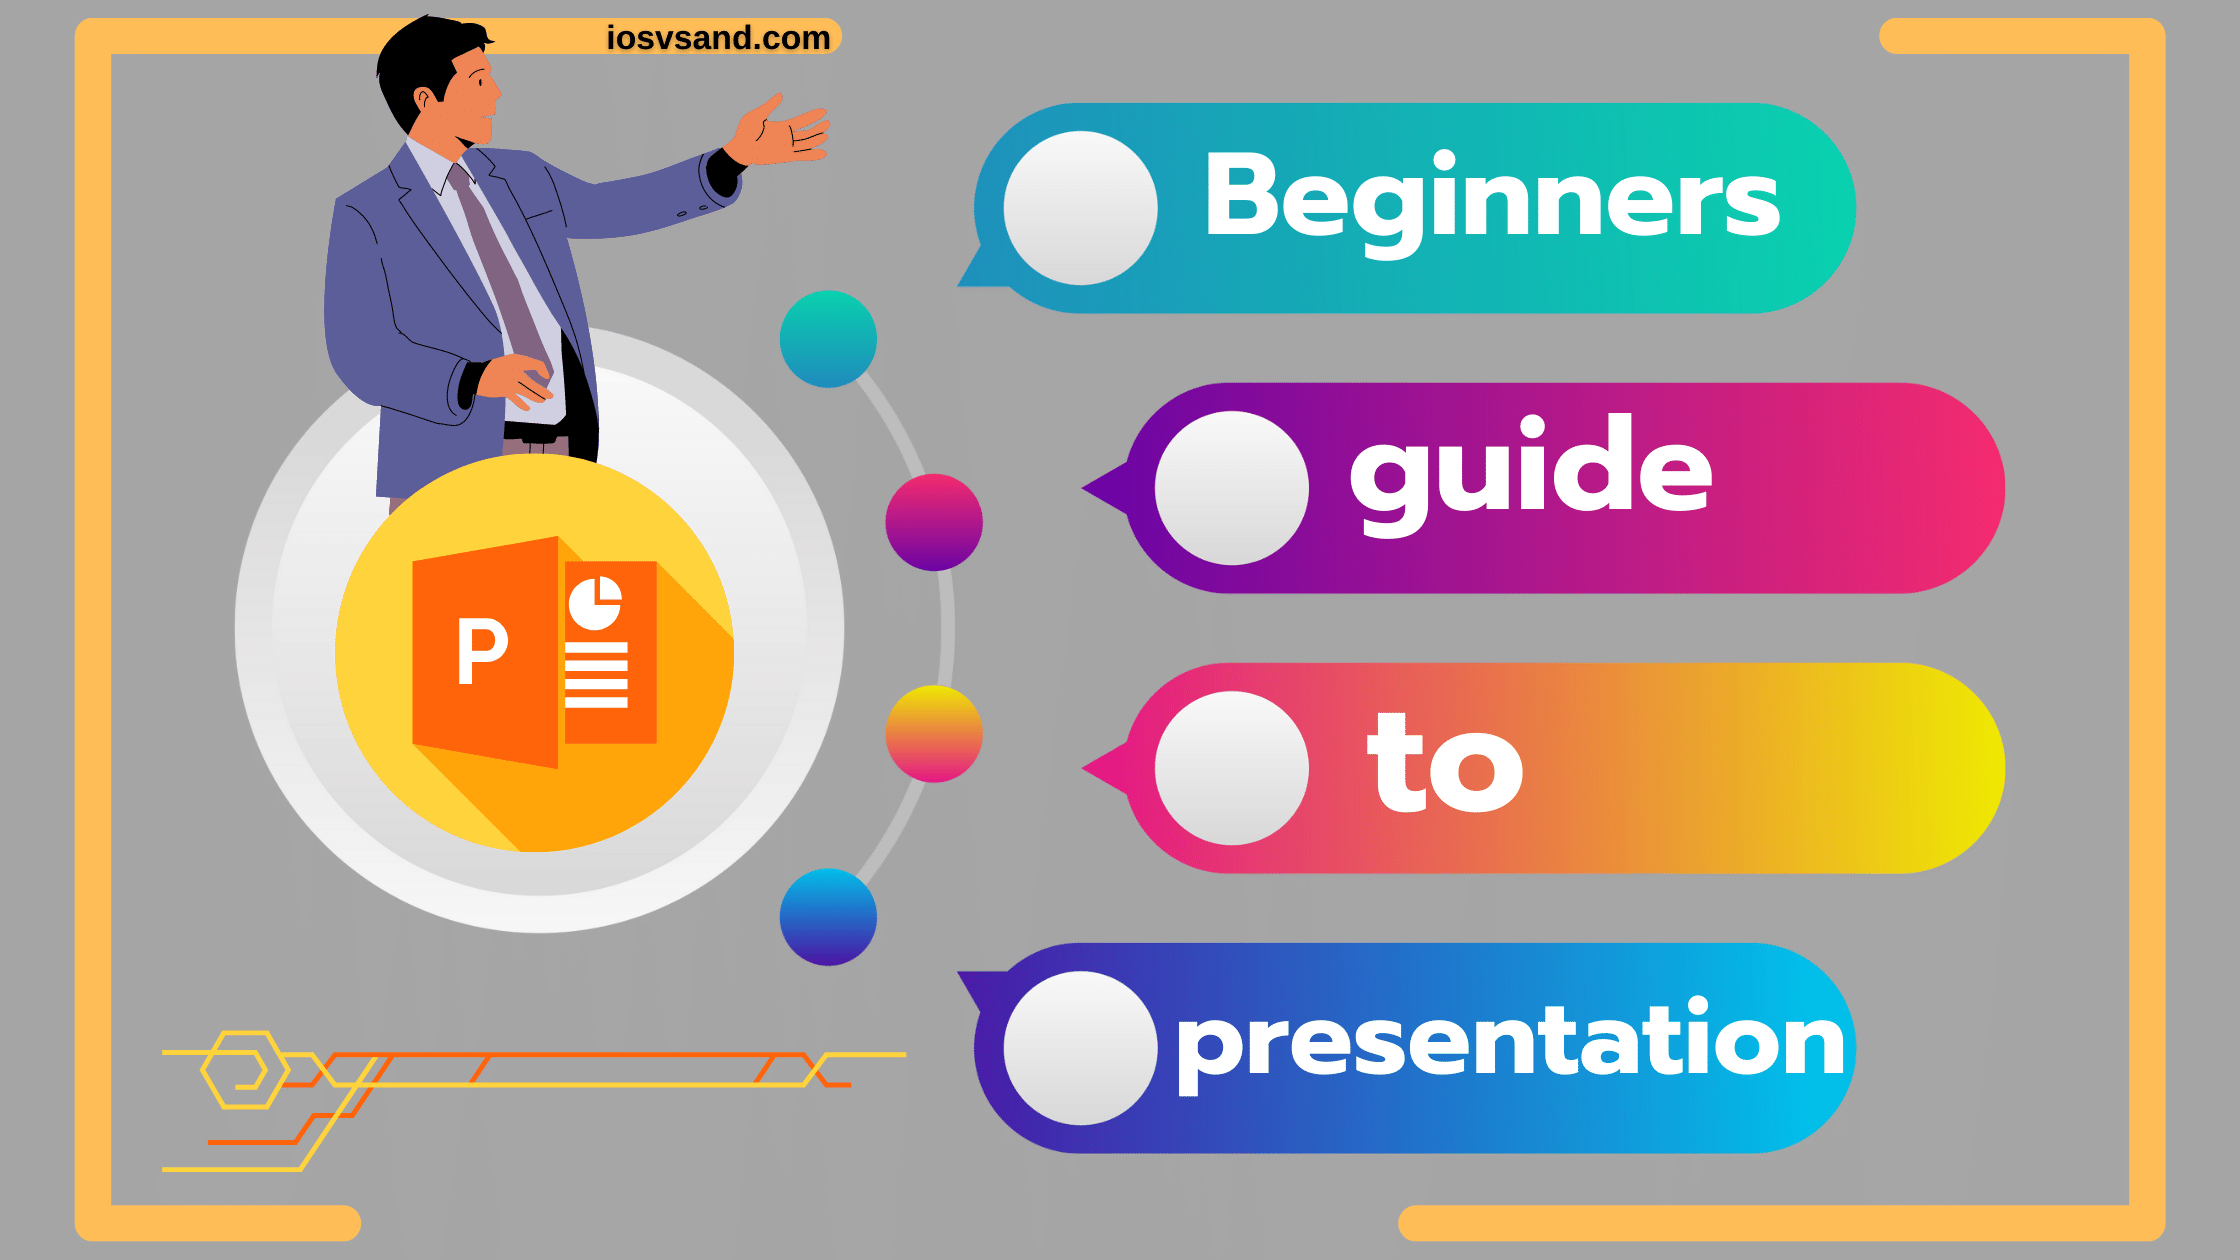 Beginners Guide to presentation tools online